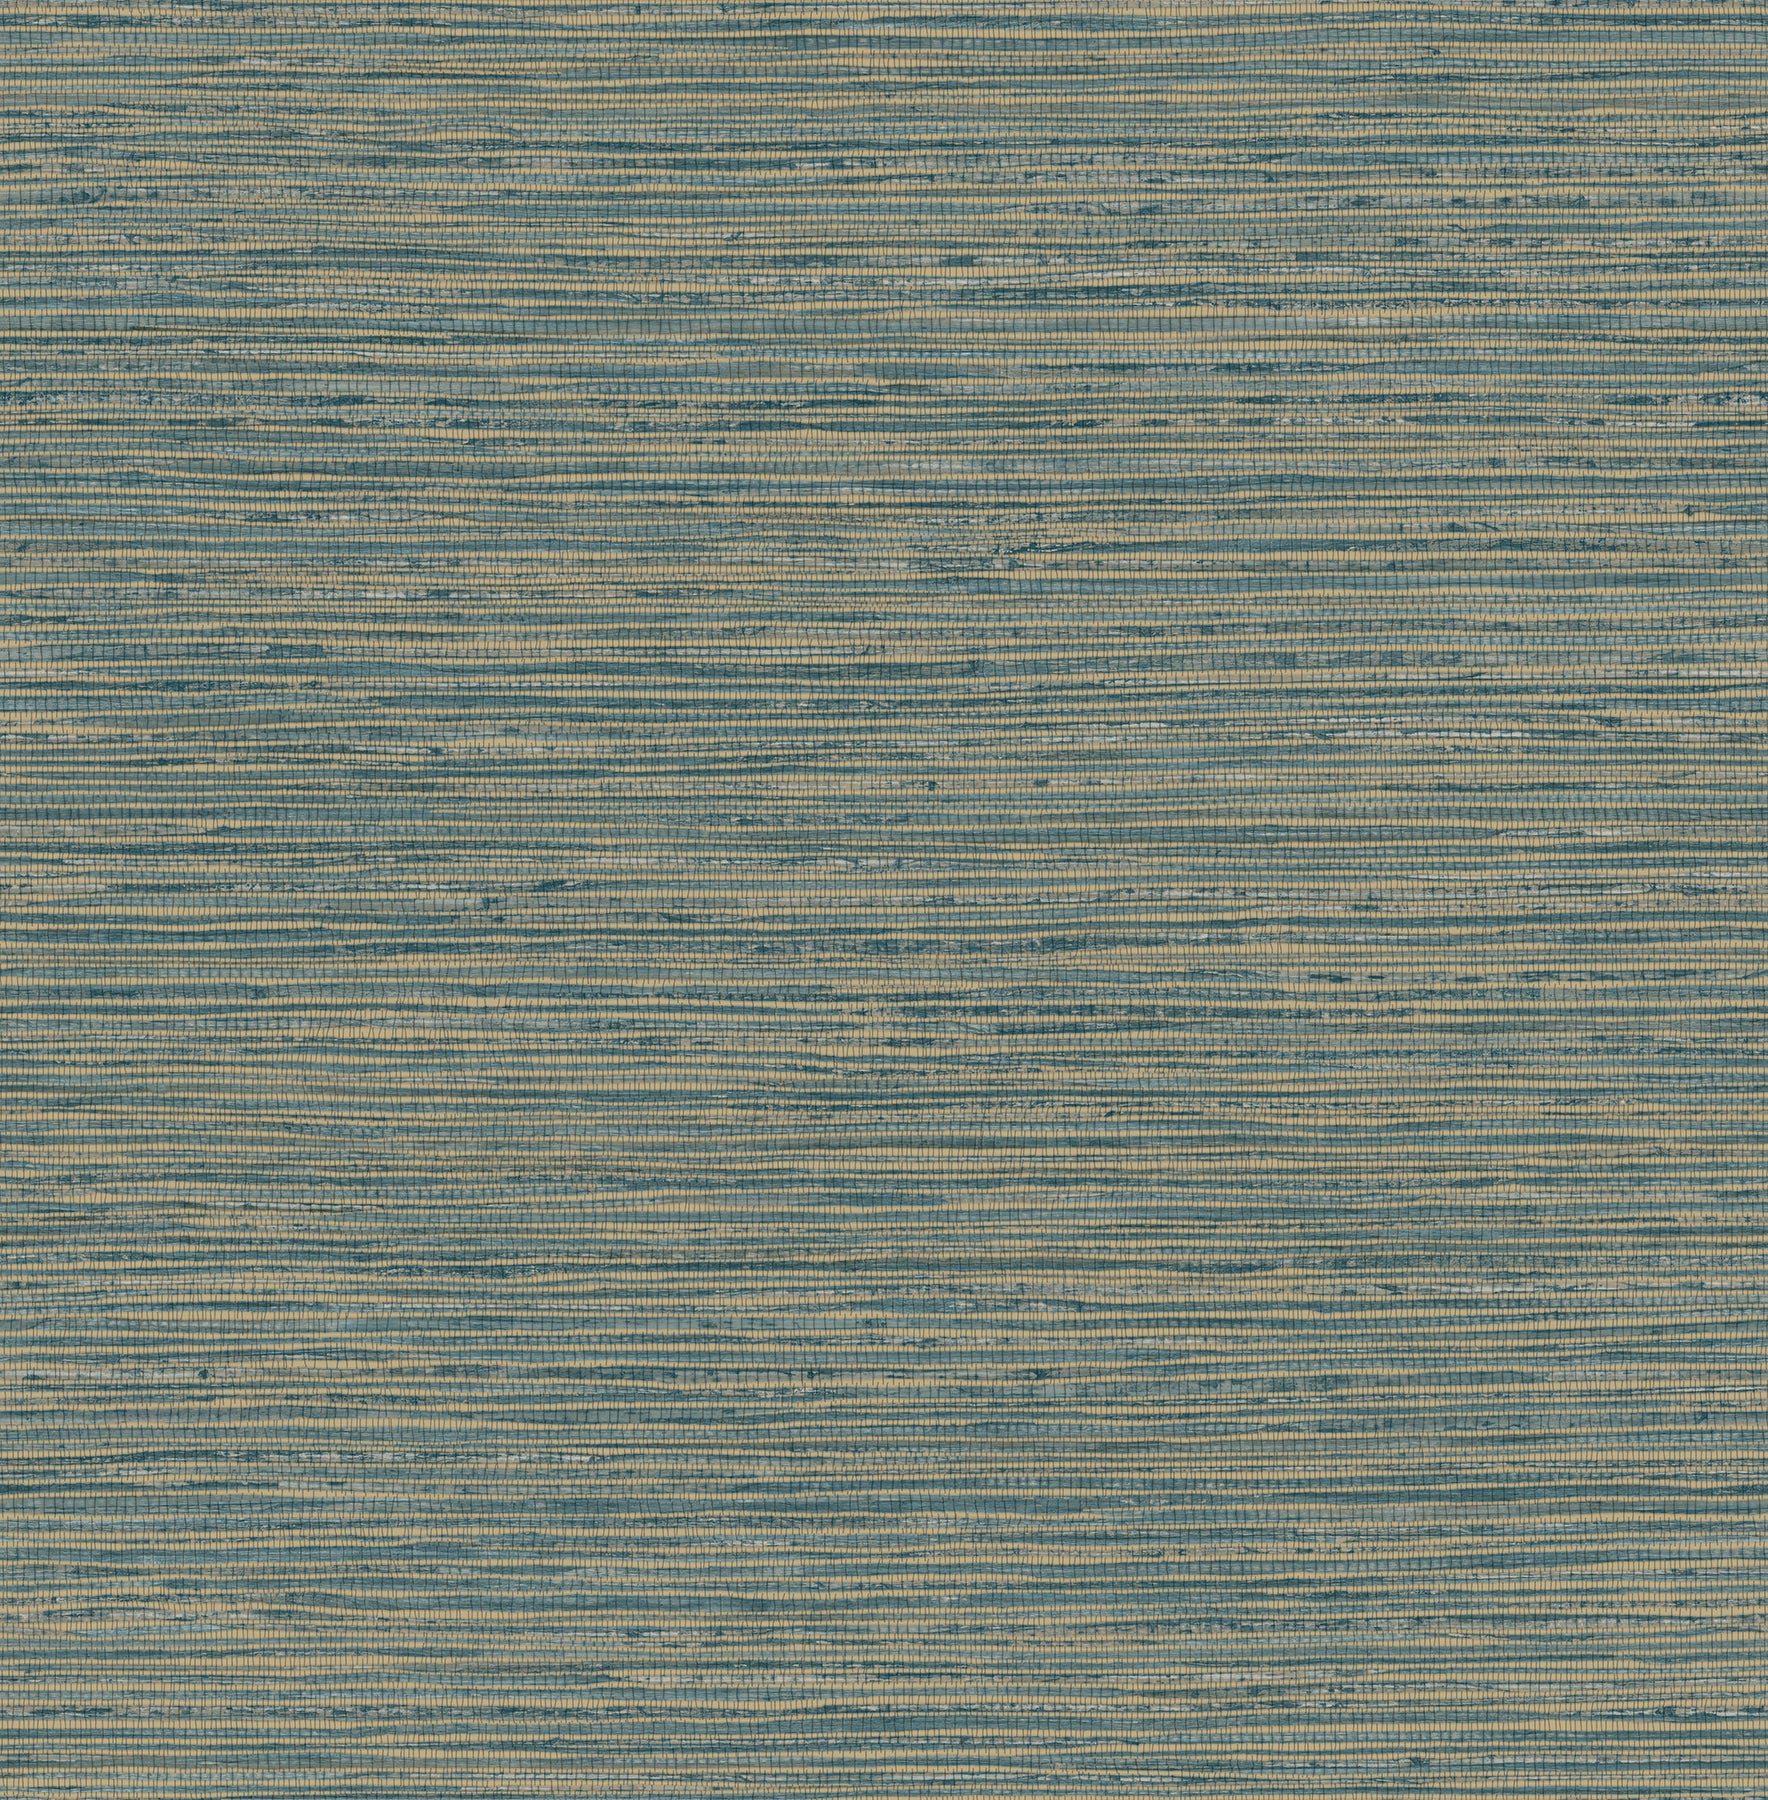 Dimensional Grasscloth Peel and Stick Wallpaper Peel and Stick Wallpaper RoomMates Roll Teal 